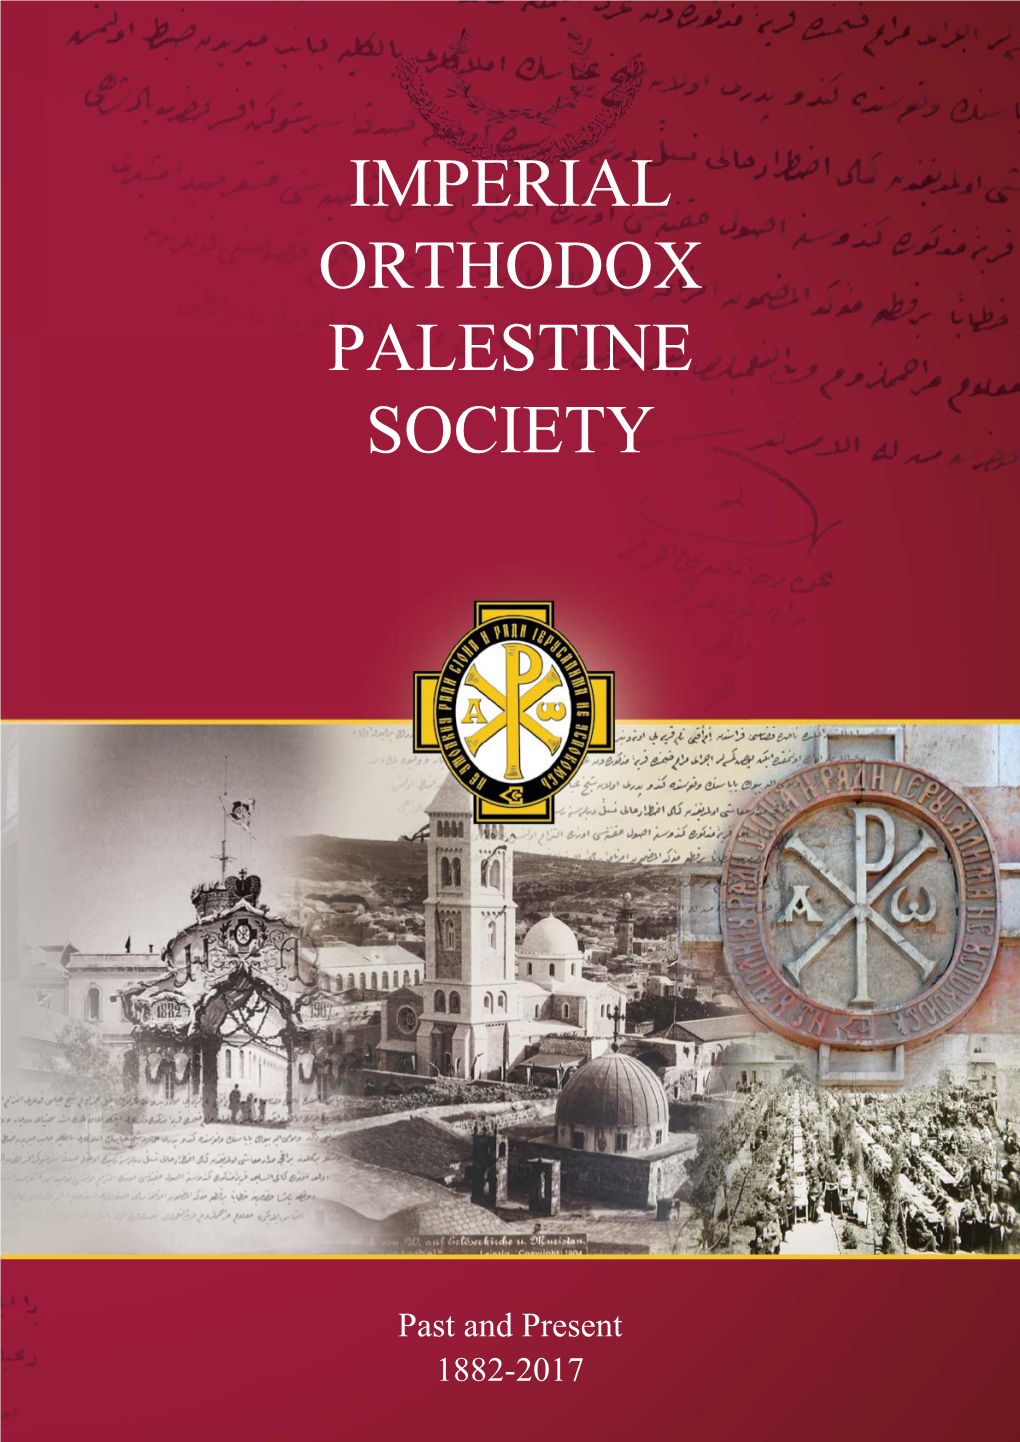 IMPERIAL ORTHODOX PALESTINE SOCIETY the IMPERIAL ORTHODOX PALESTINE SOCIETY Is an International Public Organisation Under the Jurisdiction of the Russian Federation